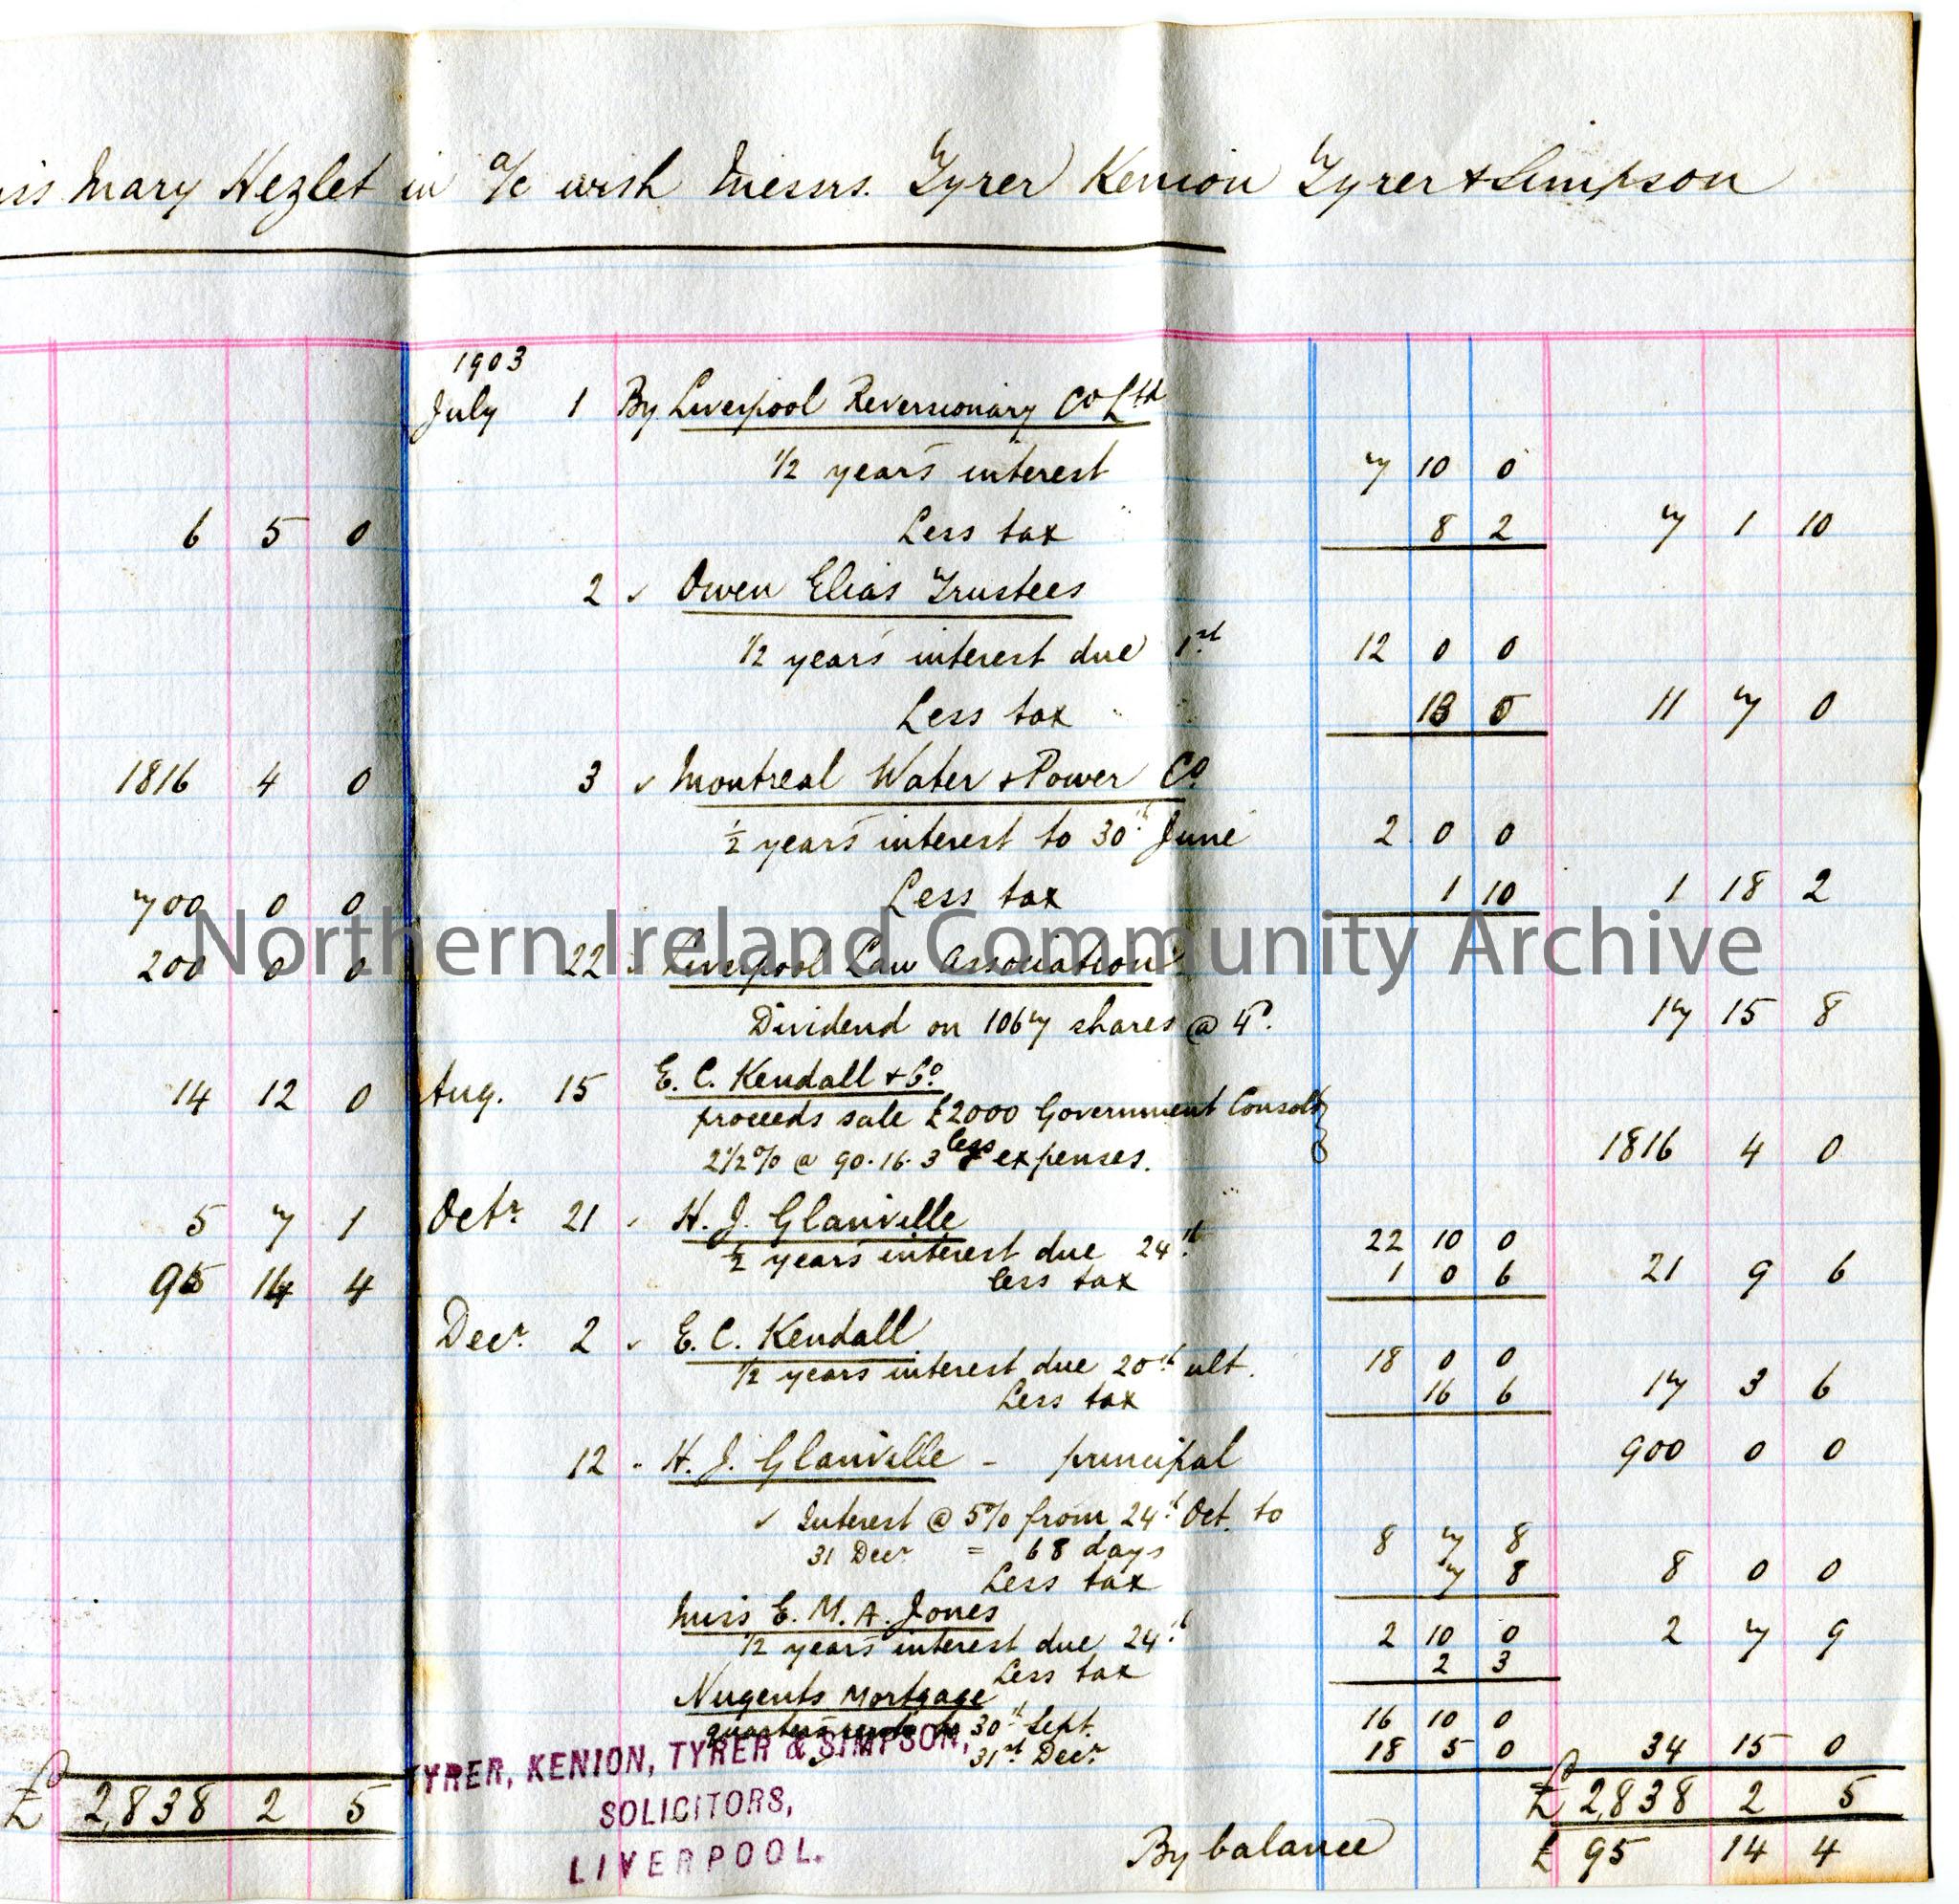 Handwritten record of accounts for ‘Miss Elizabeth Hezlet and the Executors of Miss Mary Hezlet’, from Tyrer, Kenion, Tyrer & Simpson Solicitors. Half… – scan197b